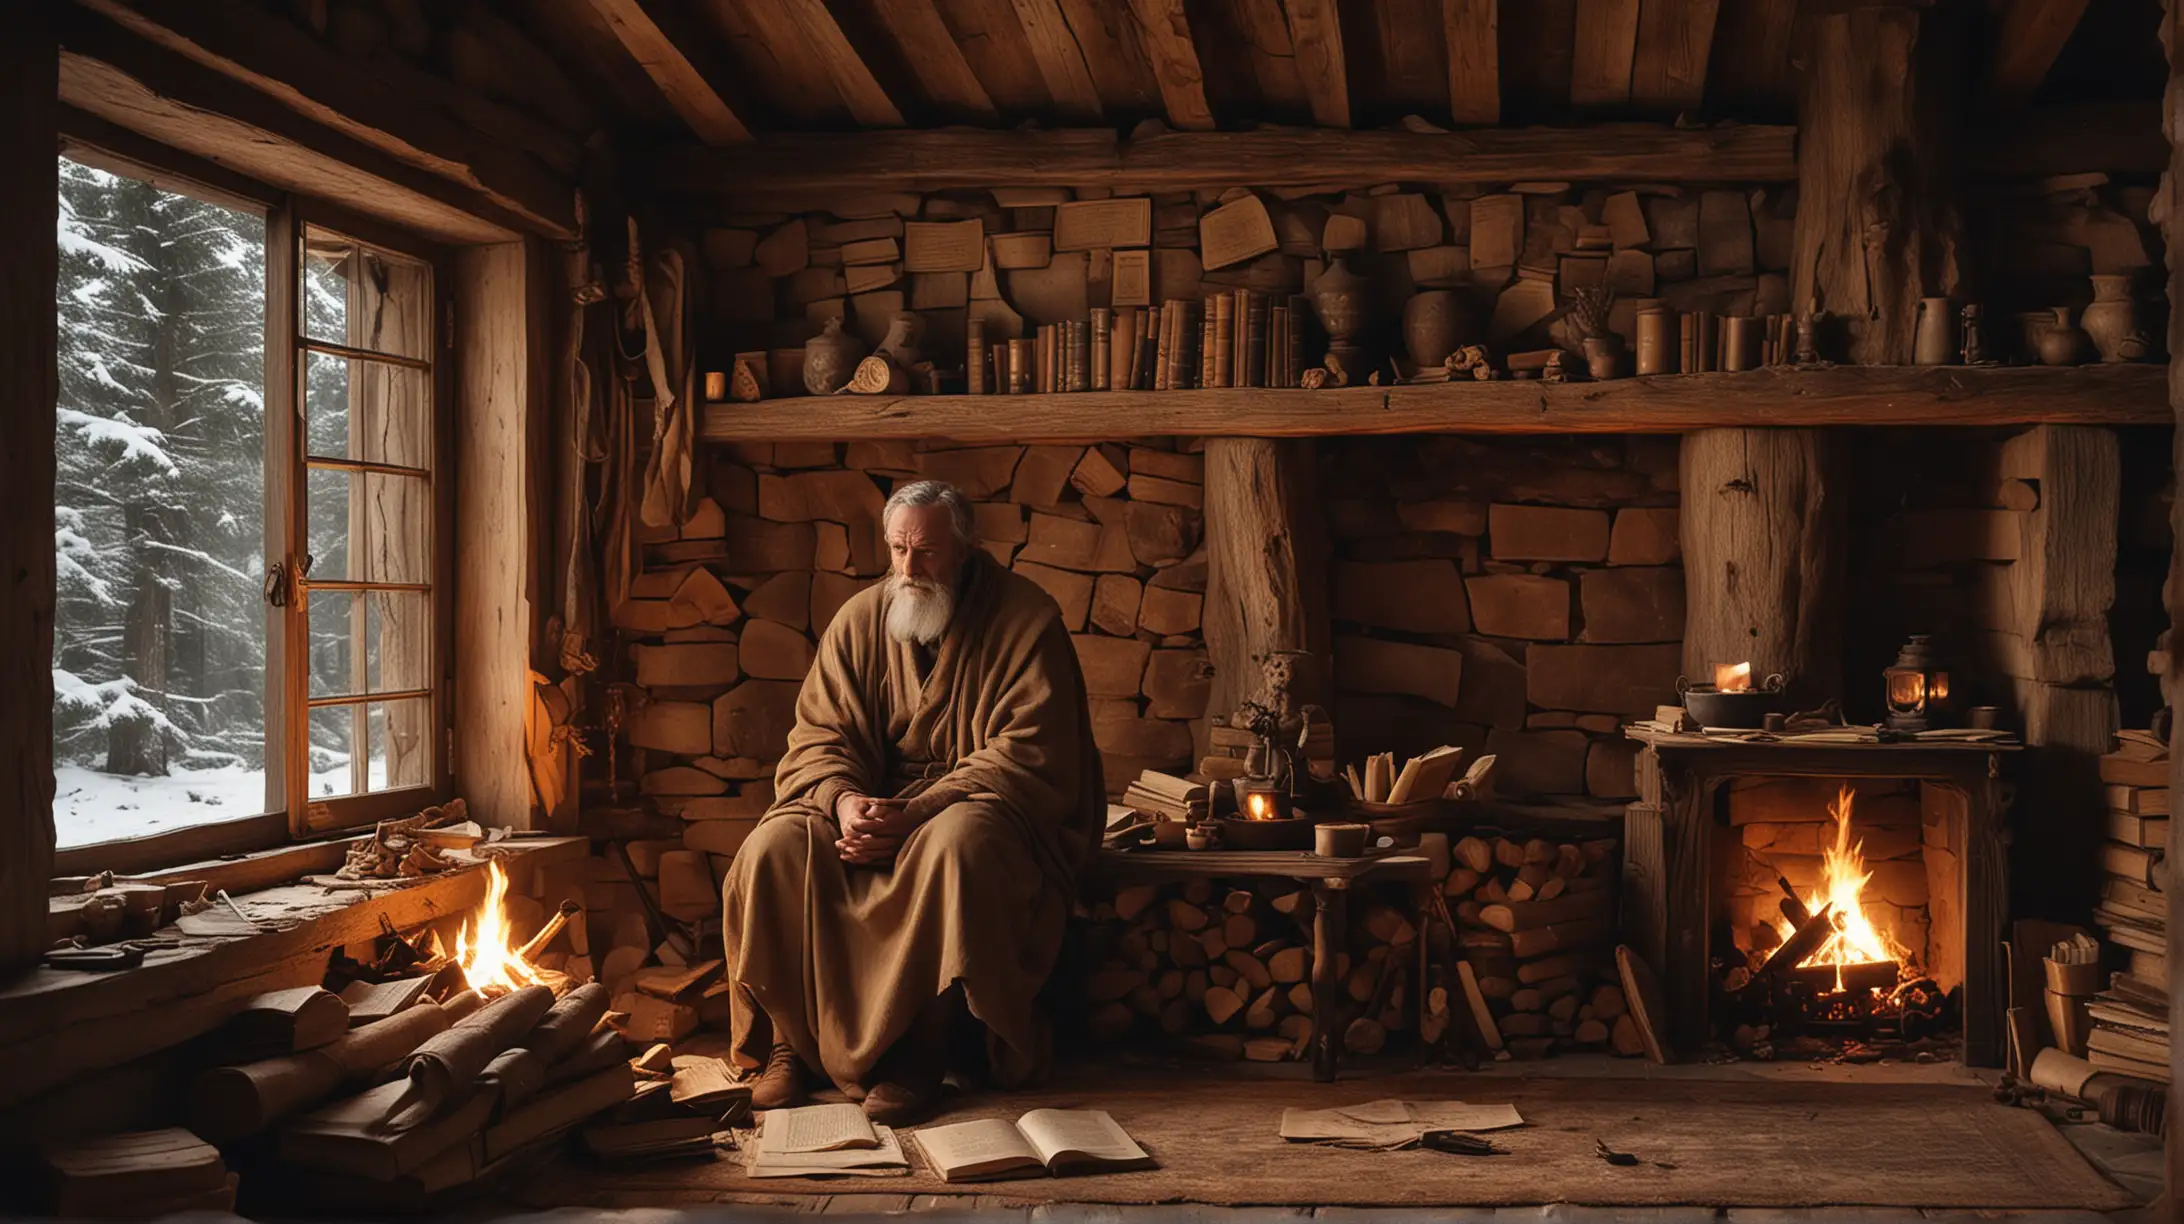 Stoic Philosopher Contemplating Wisdom by Fireplace in Rustic Cabin